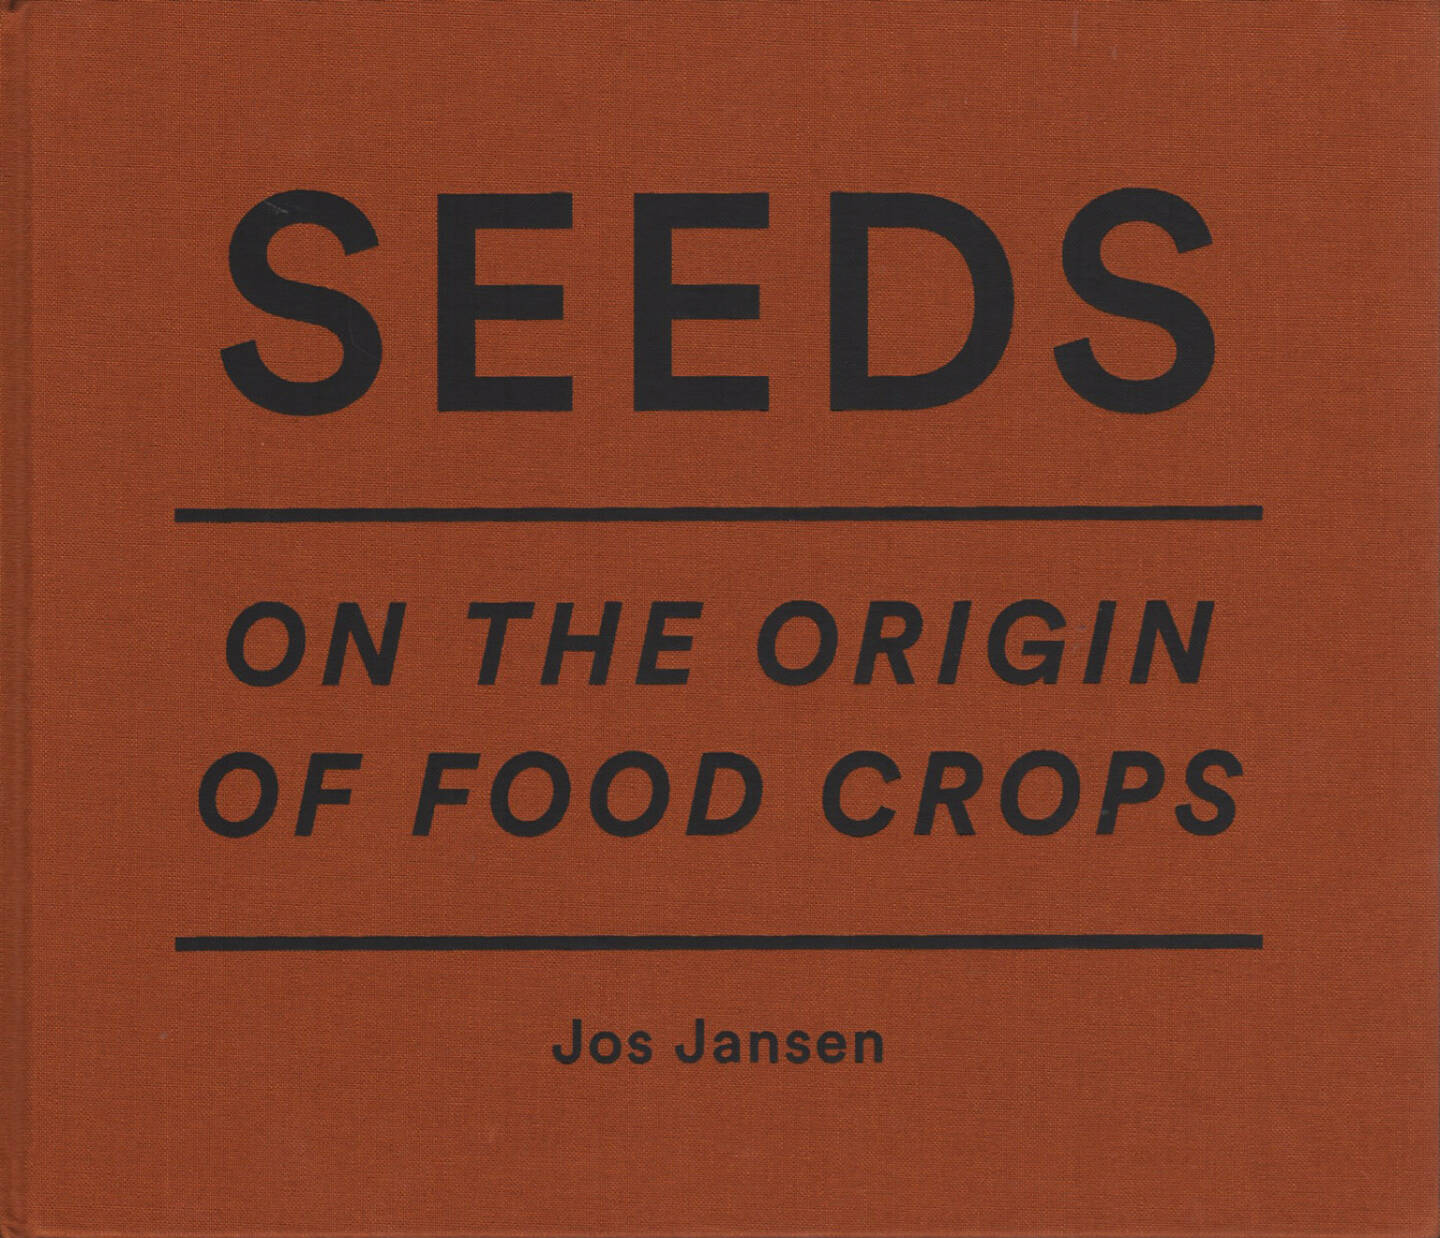 Jos Jansen - Seeds - On the Origin of Food Crops, The Eriskay Connection 2014, Cover - http://josefchladek.com/book/jos_jansen_-_seeds_-_on_the_origin_of_food_crops